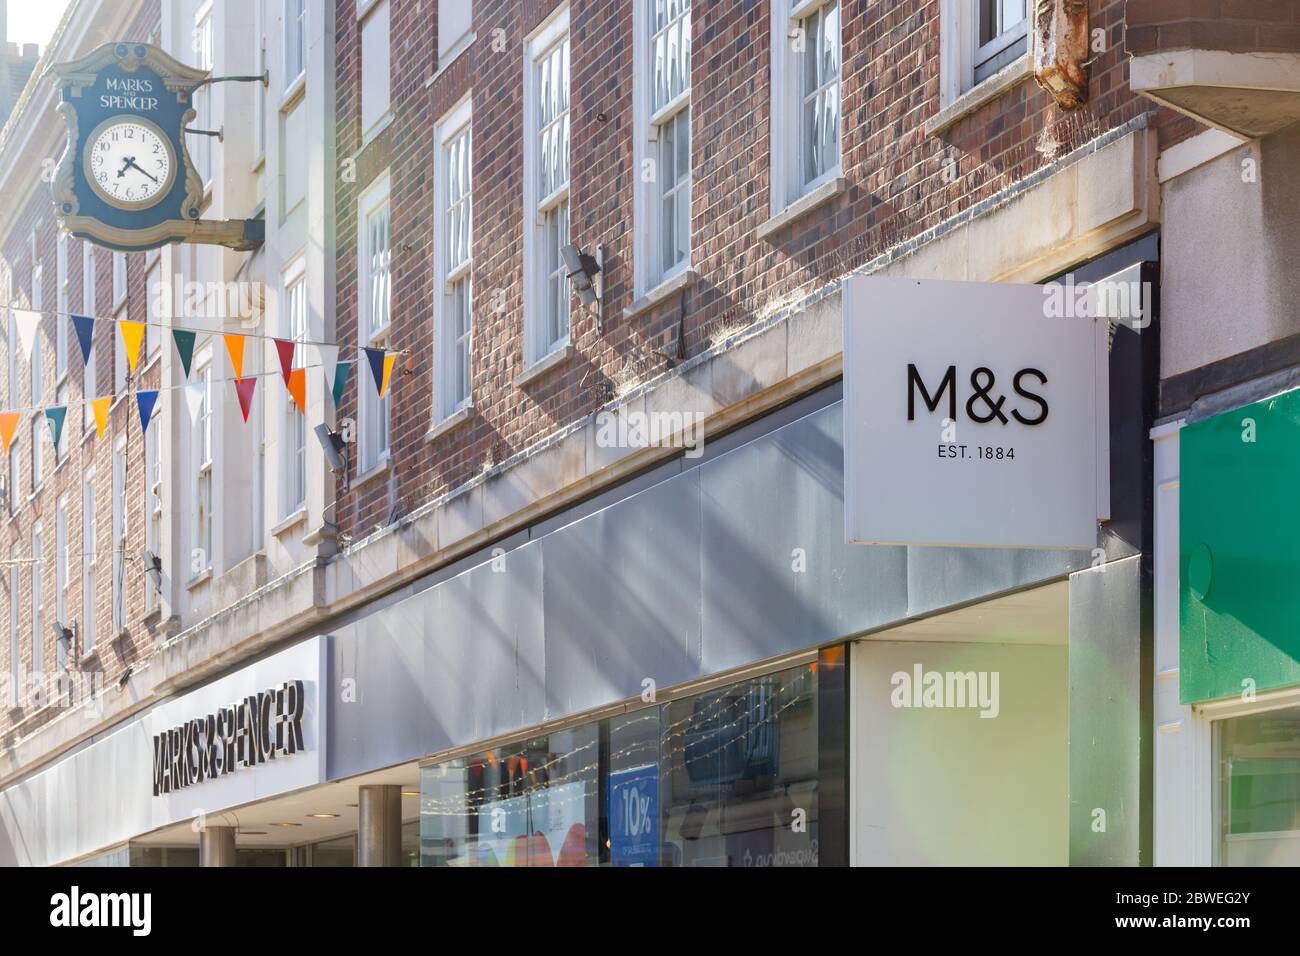 Worthing, Sussex, UK; 29th May 2020; Facade of Marks & Spencers Store at an Oblique Angle With Signage and a Large Clock Visible. Stock Photo